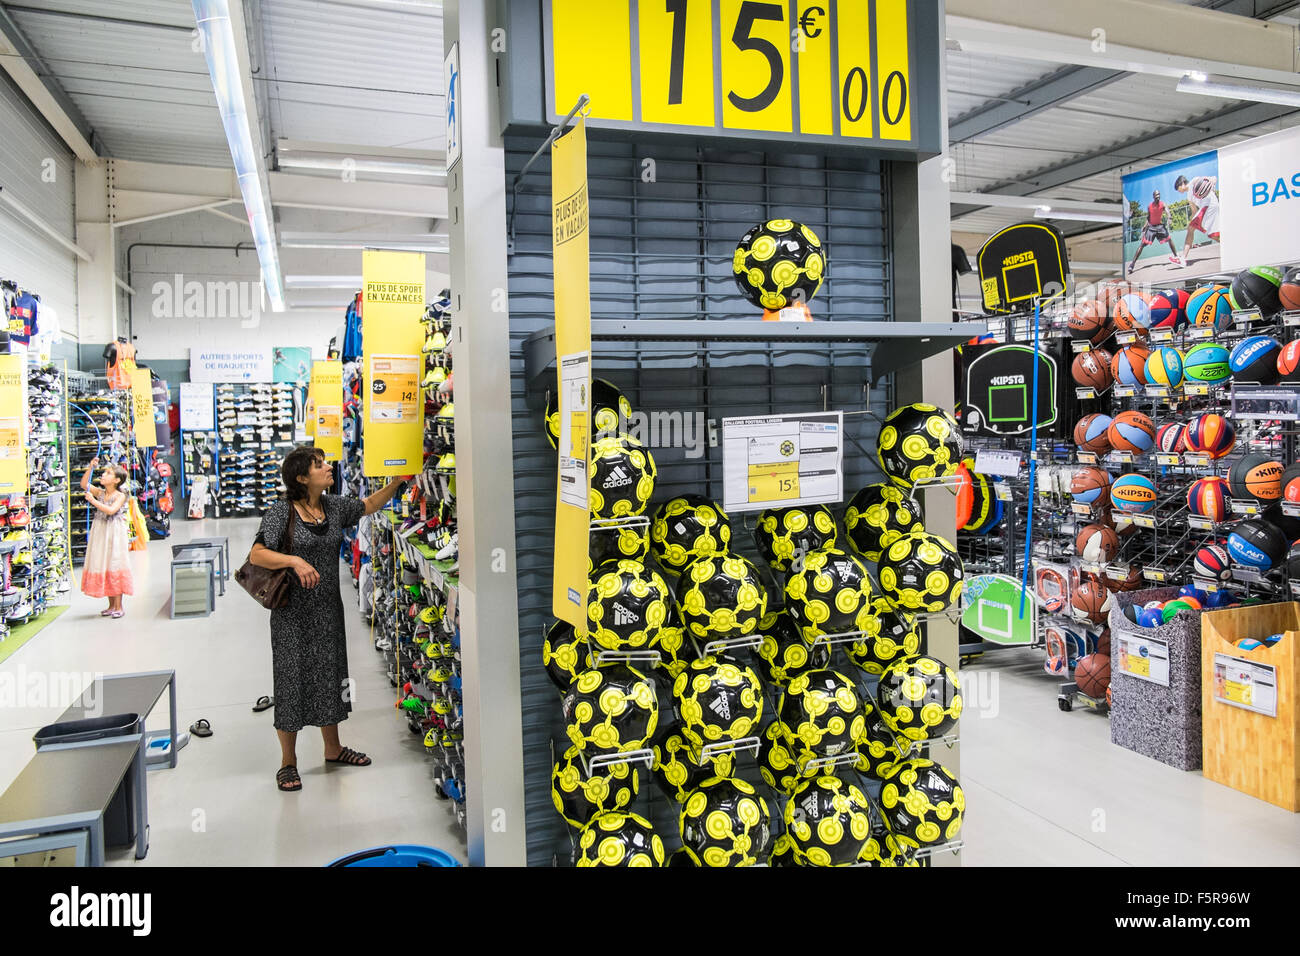 Bargain,cheap,Decathlon,sport, sports, shop,sports shop,outlet,store,huge, shopping,superstore, in, Carcassonne,Aude,South of France,France,Europe  Stock Photo - Alamy